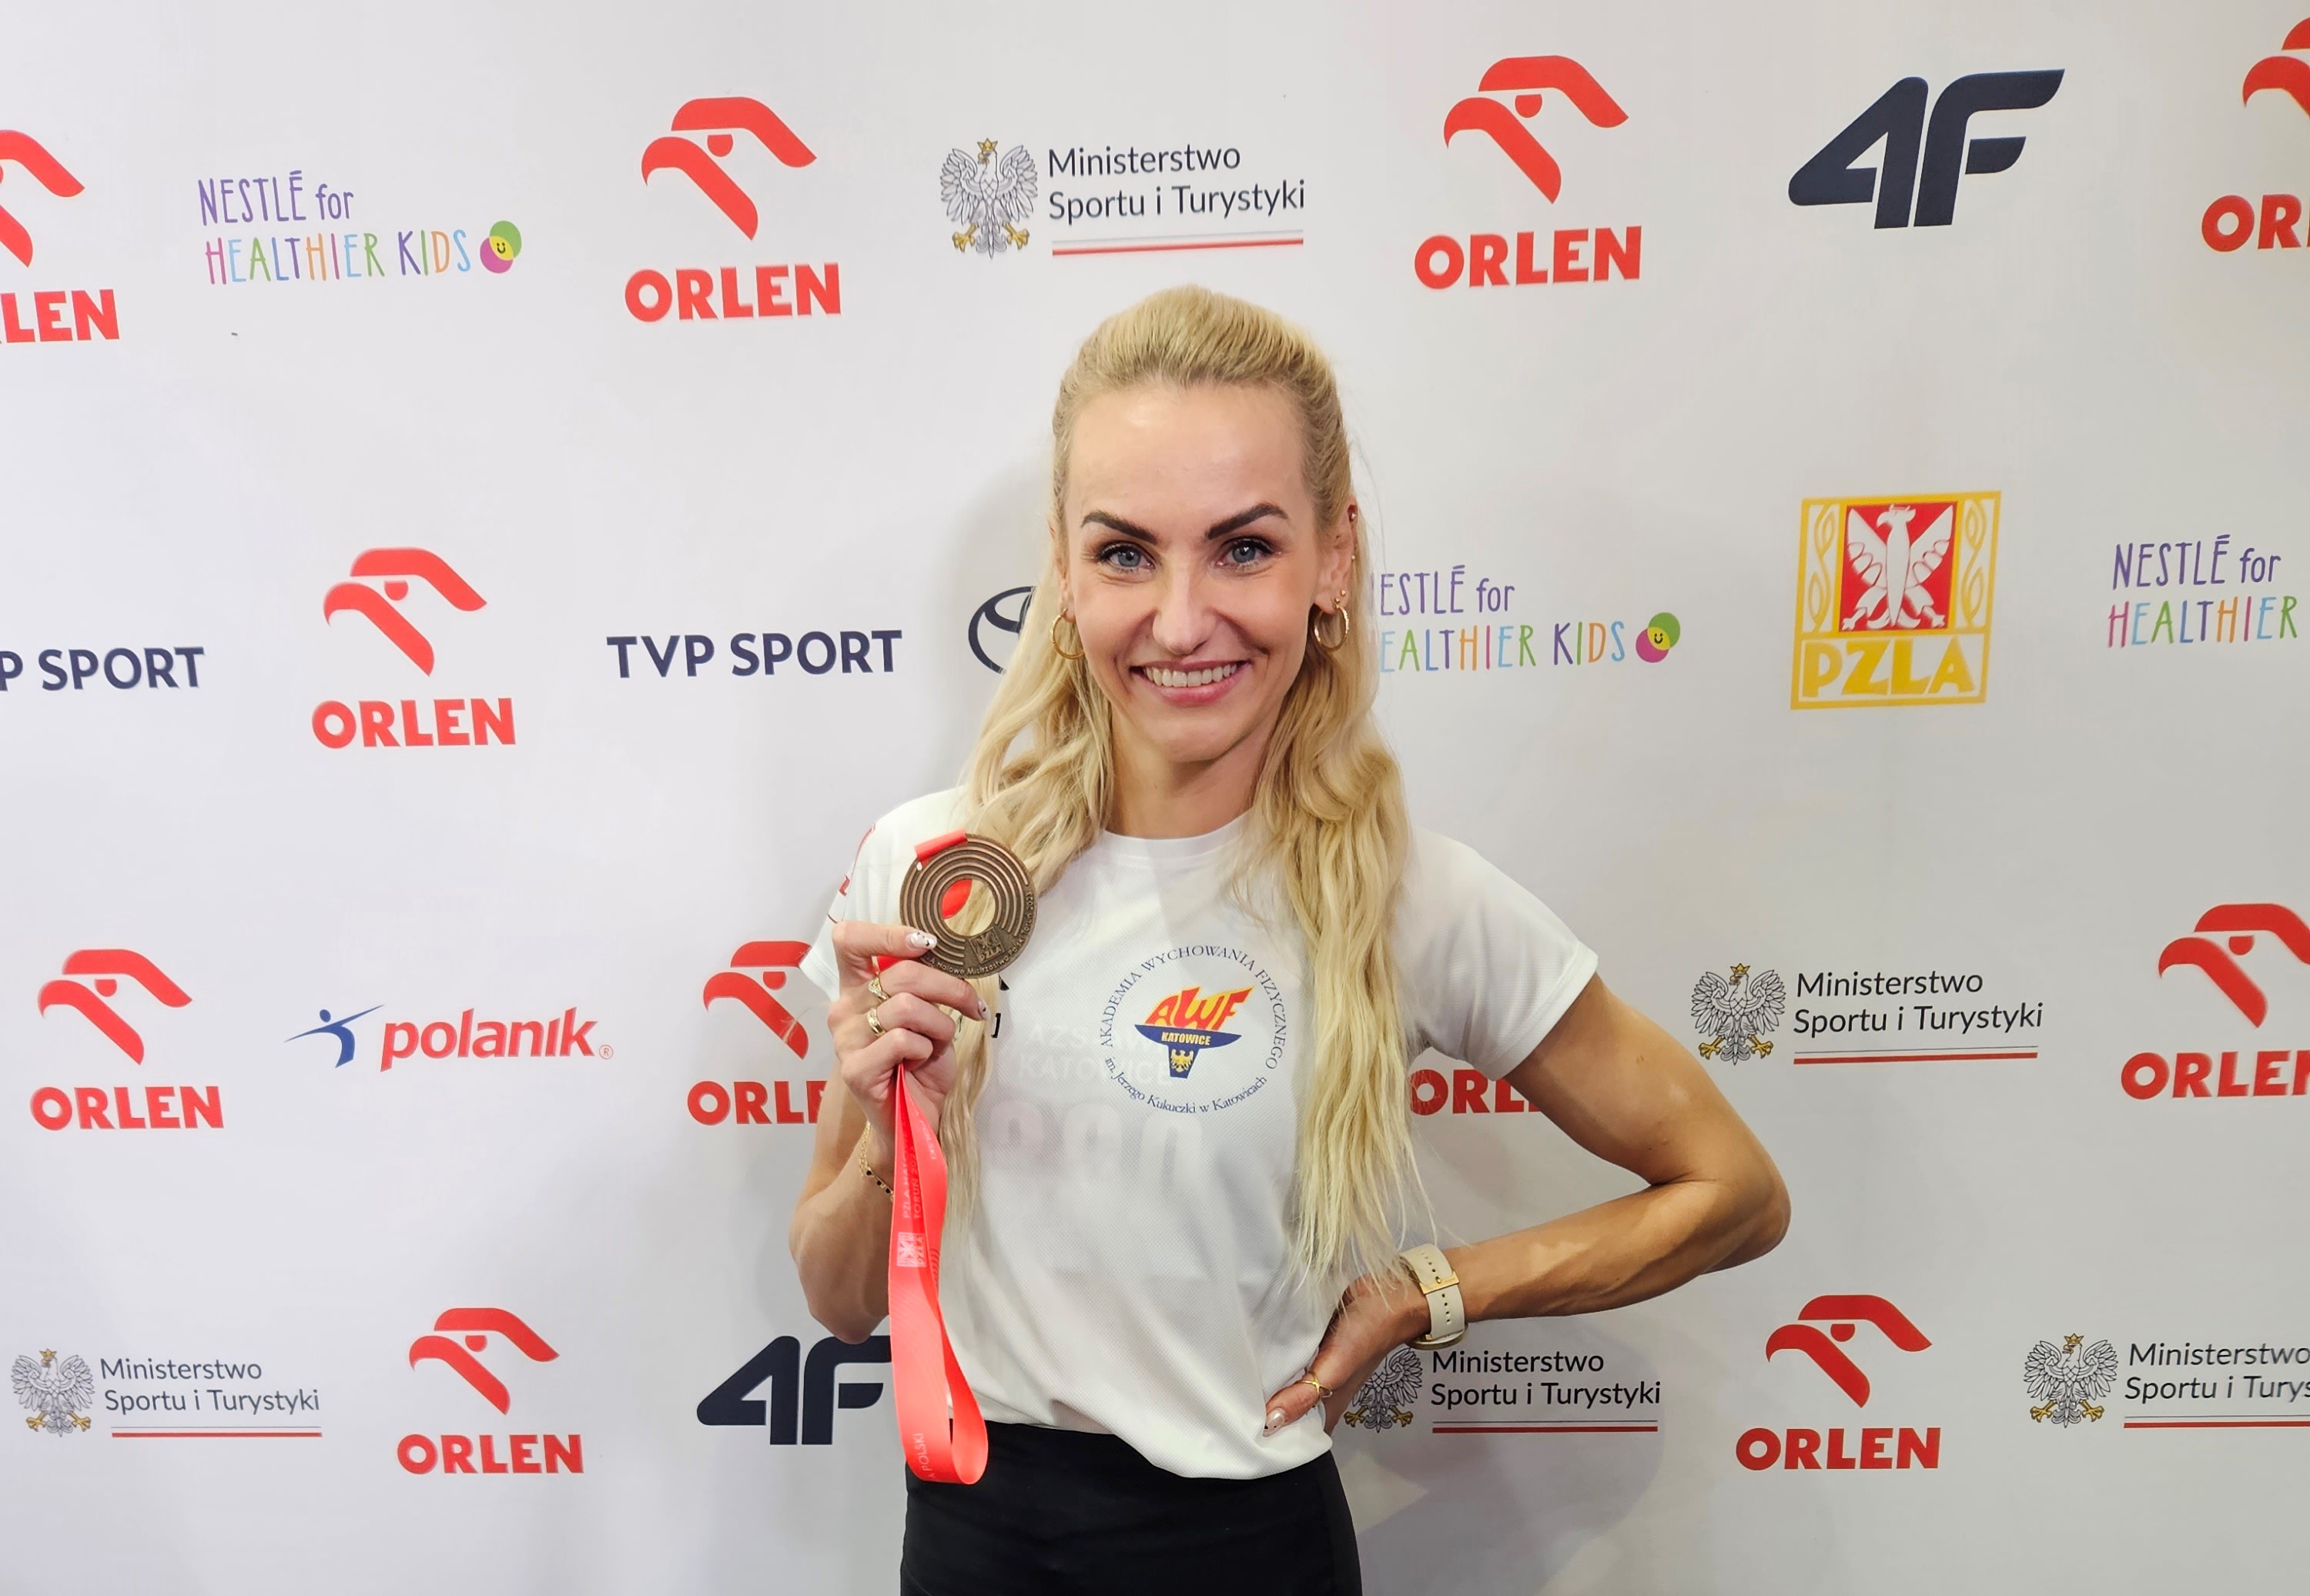 Justyna Swiety-Ersetic: In sport, anything is possible